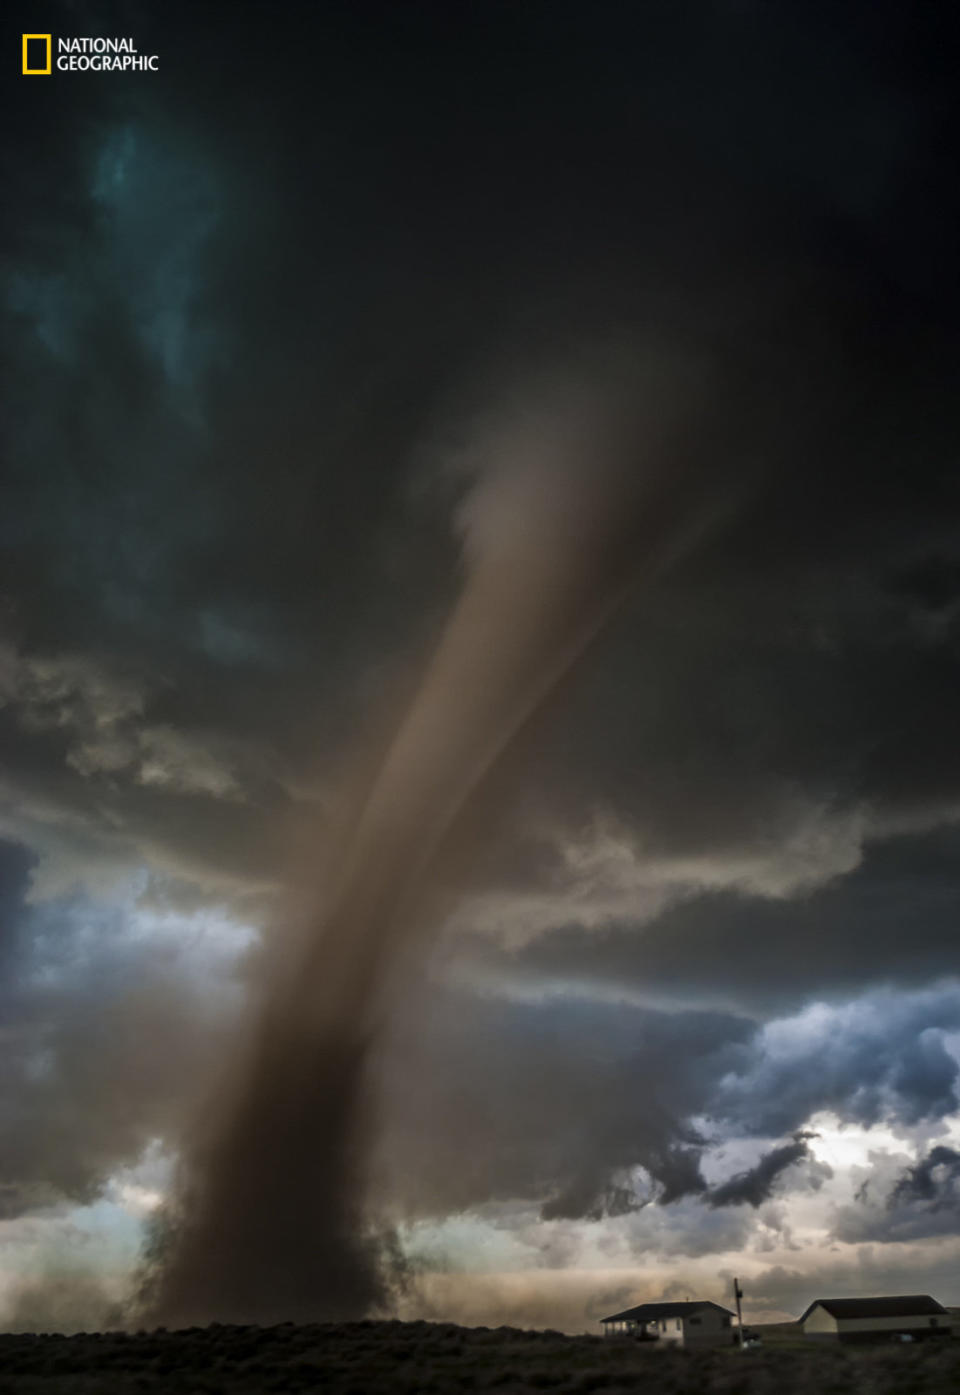 Tori Shea-Ostberg: "An EF2 tornado bears down on a home in Wray, Colorado, on May 7, 2016. As soon as we were safe, as the tornado roared off into the distance through a field before roping out, we scrambled up the hill to check on the residents. Thankfully, everyone was all right, and we were grateful for that. As I was checking in with a young woman coming out of the basement, we became very aware of a strong new circulation right above our heads. We needed to run for cover and did so before saying a proper goodbye."